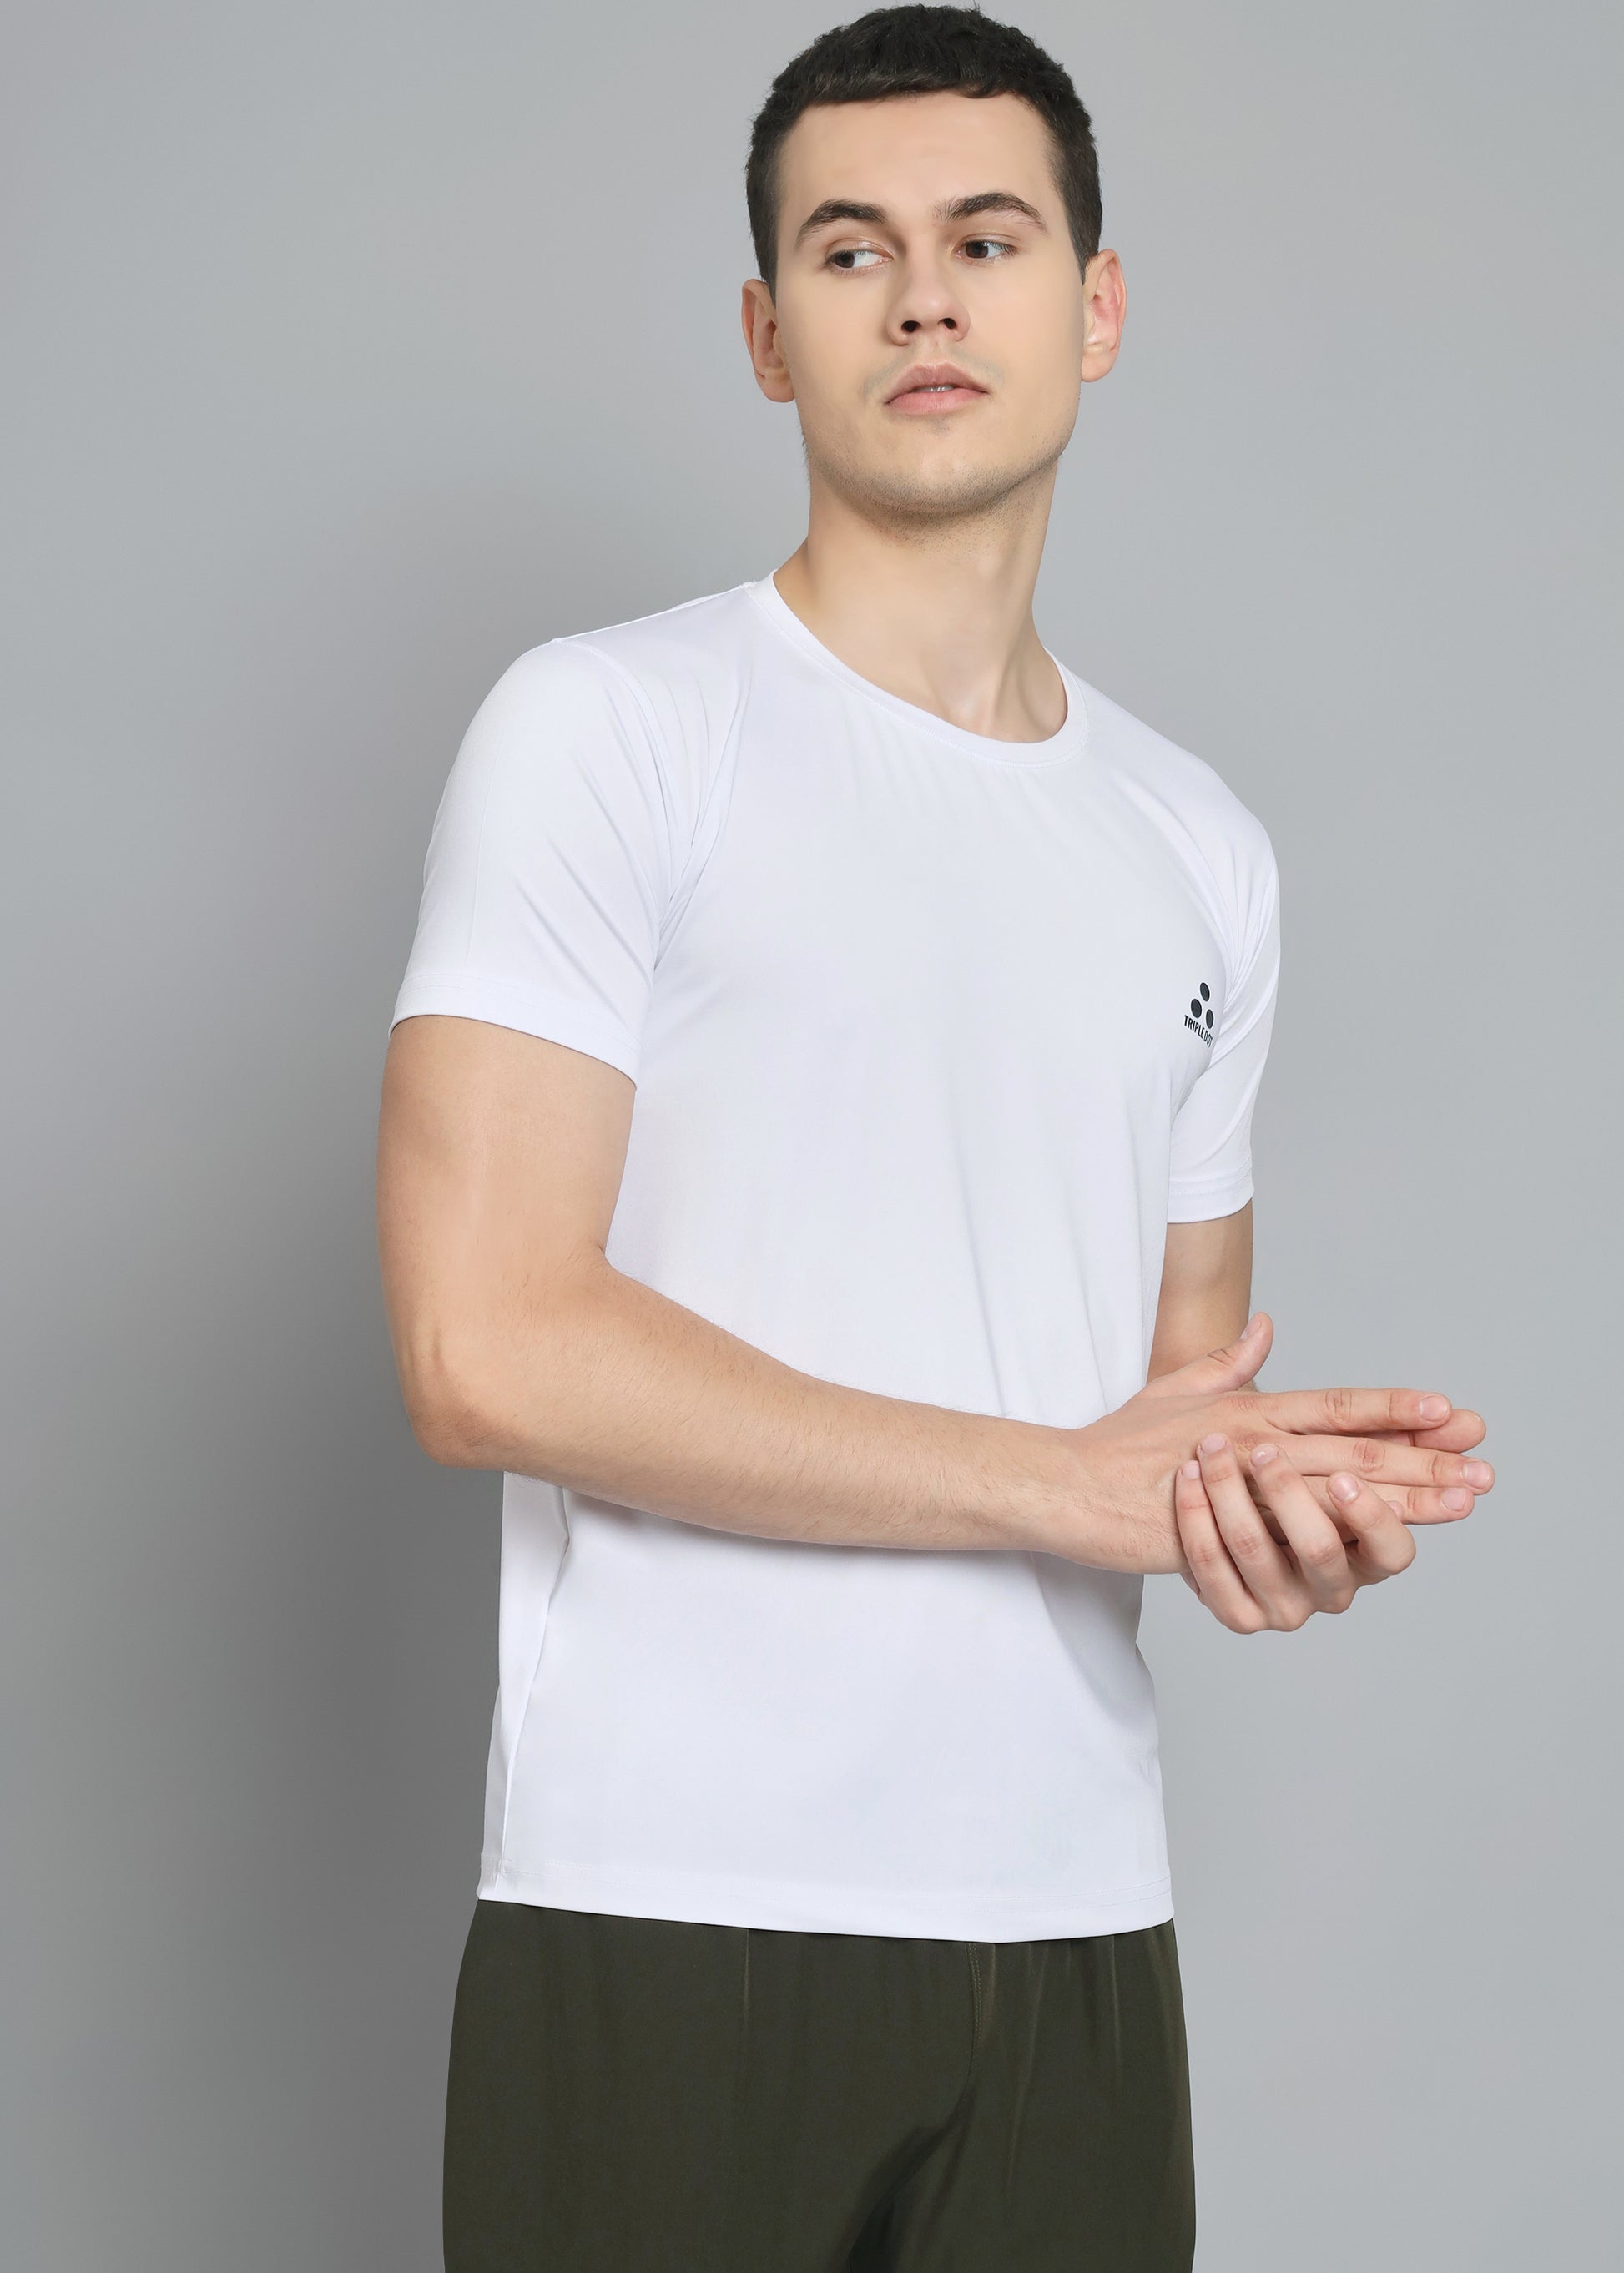 Solid Polyester Regular Fit Men's Sports T-Shirt - Triple Dot Clothings